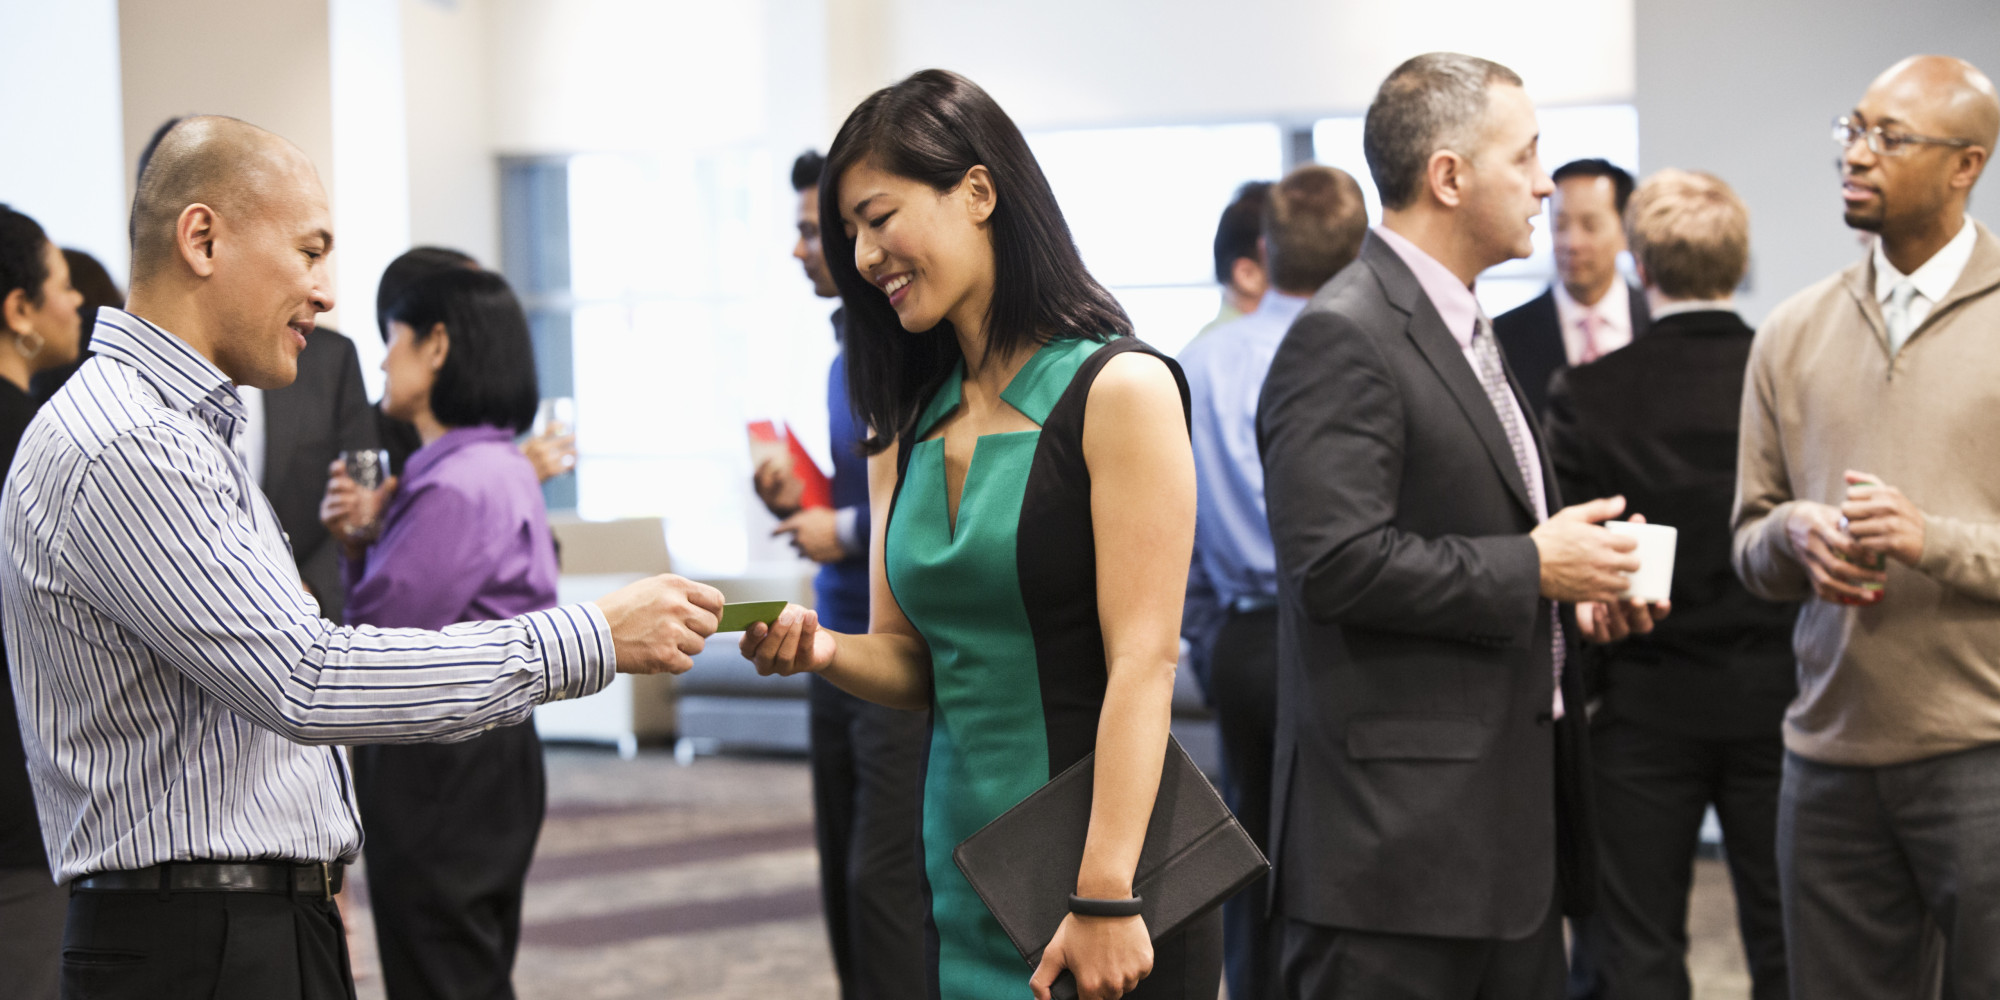 Successful Estate Agent By Attending in Networking Events